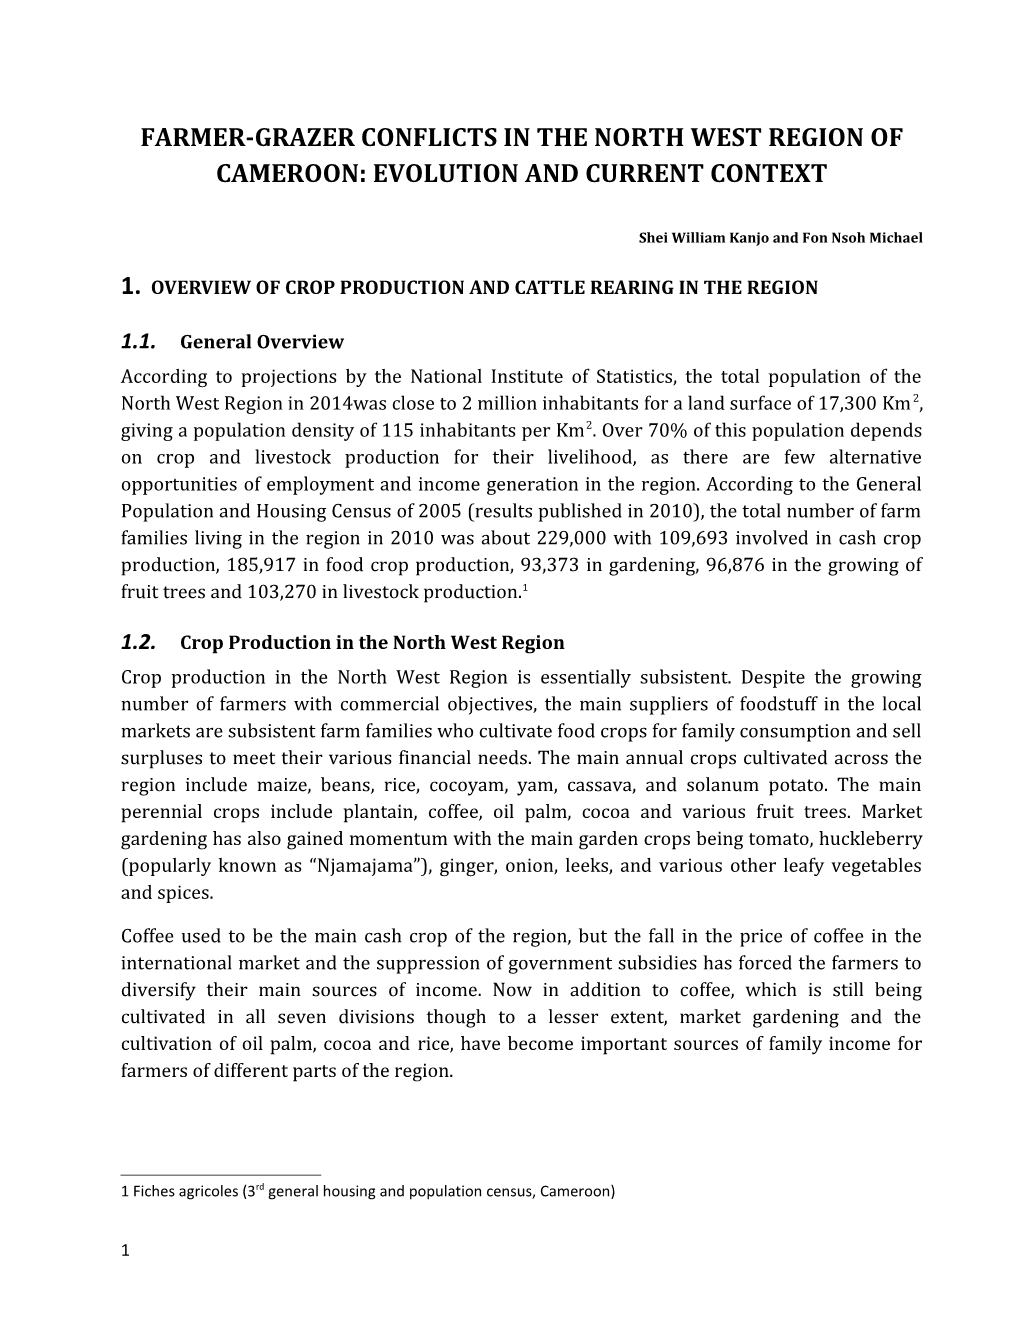 Farmer-Grazer Conflicts in the North West Region of Cameroon: Evolution and Current Context